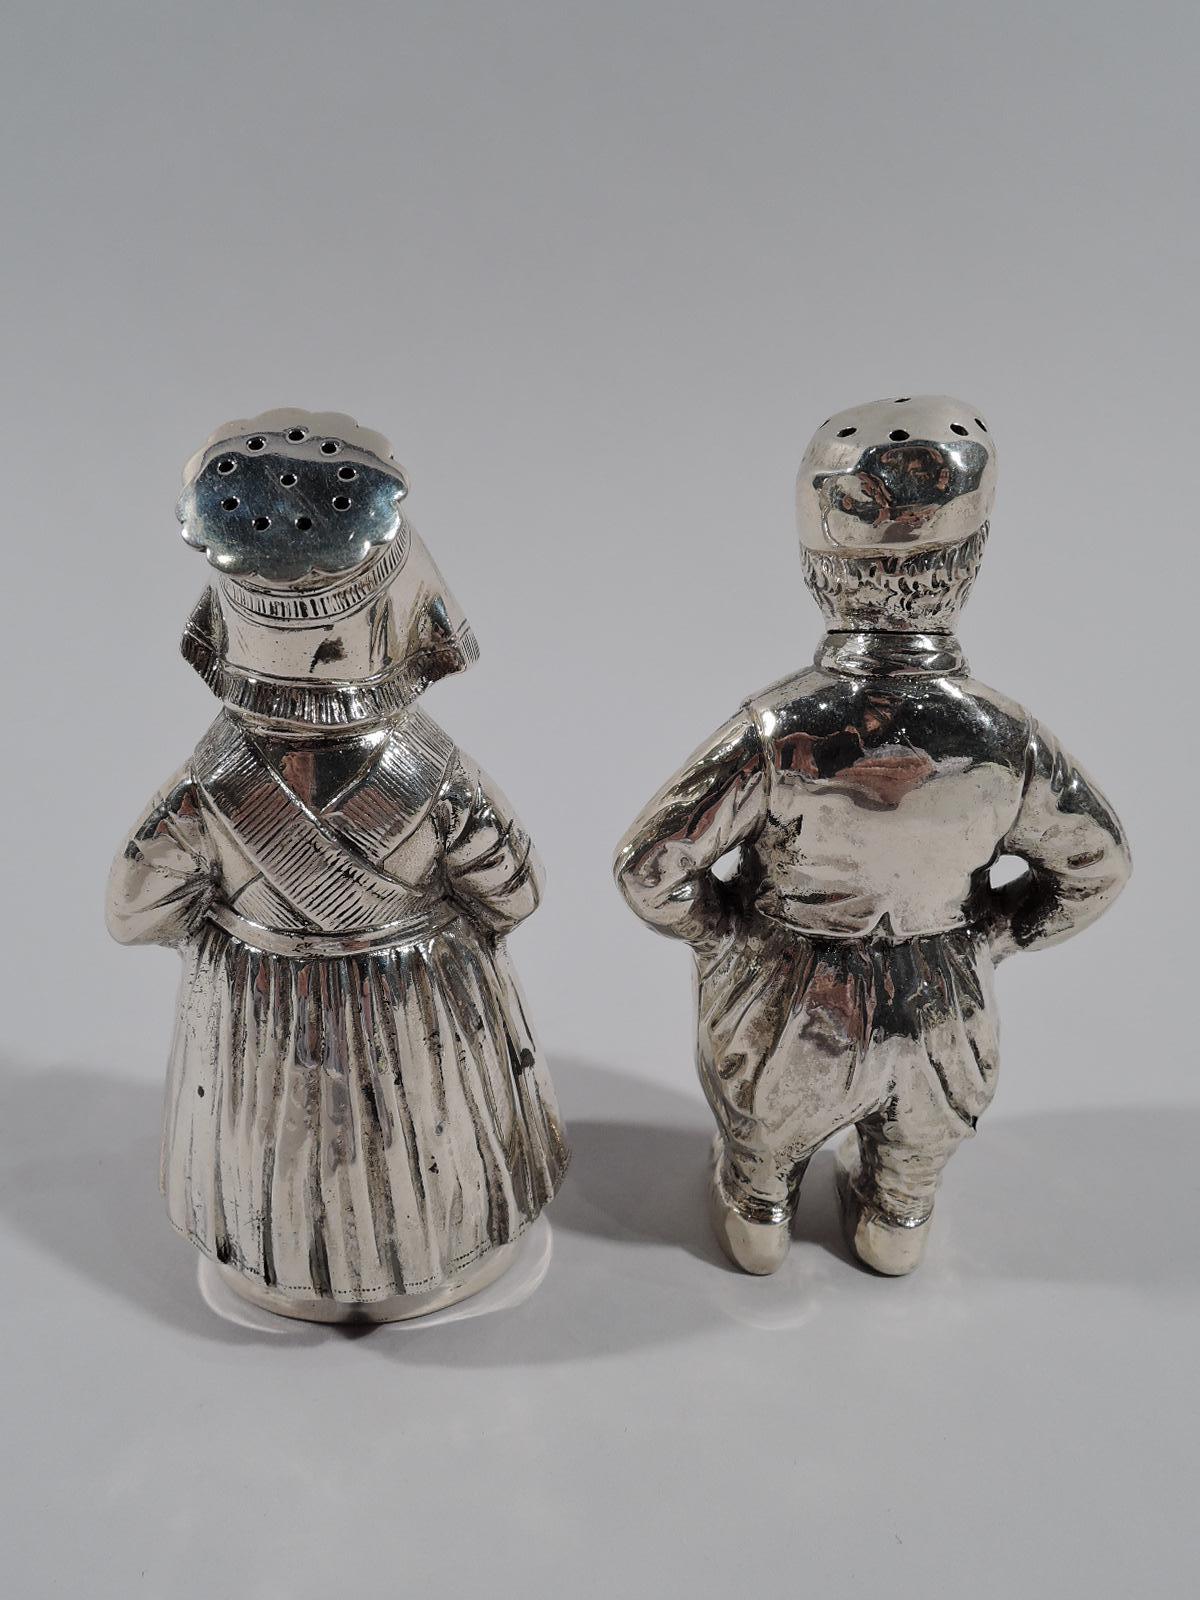 Pair of German 800 silver figural salt and pepper shakers, circa 1910. This pair comprises a boy and a girl. The boy wears baggy trousers and strikes a defiant pose with hands on hips. The girl, with shawl and apron layered over her gown, appears